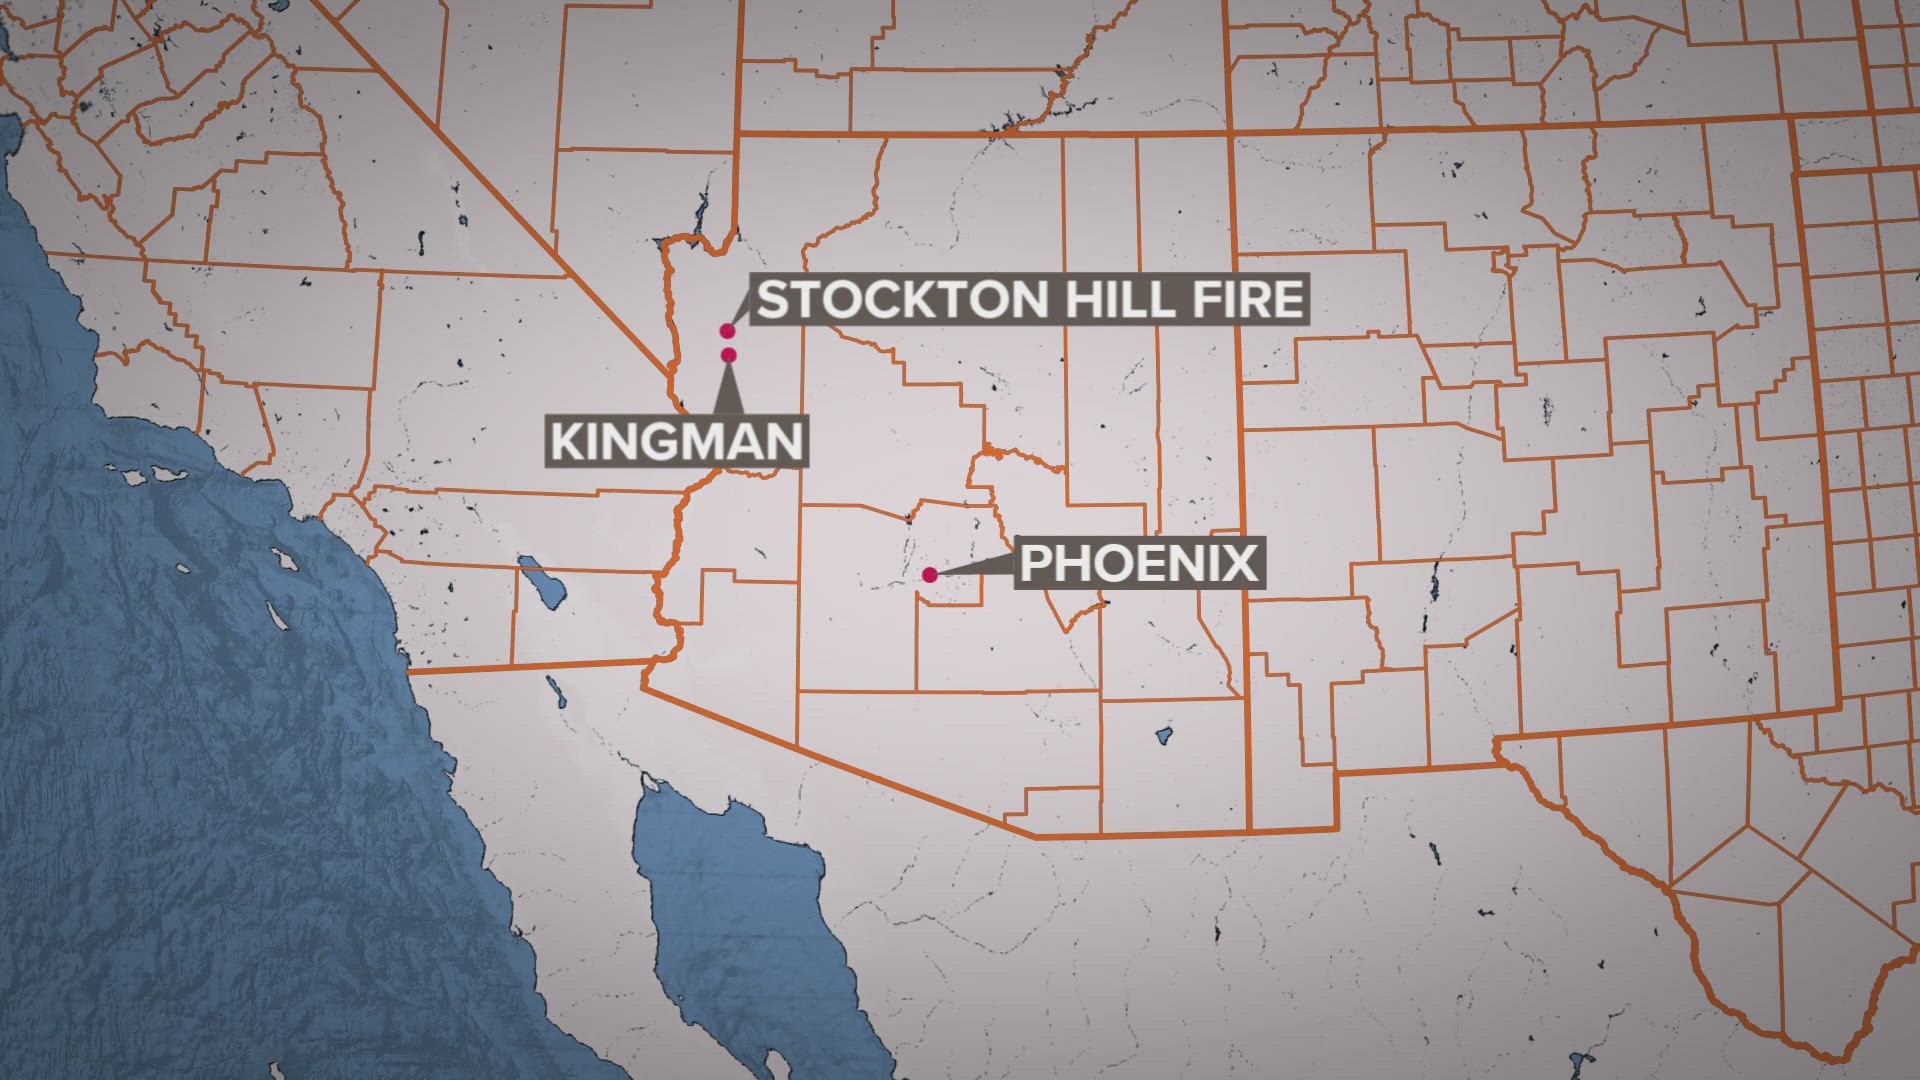 The fire has burned roughly 195 acres, fire officials said. Hot and dry conditions may challenge crews on the ground.